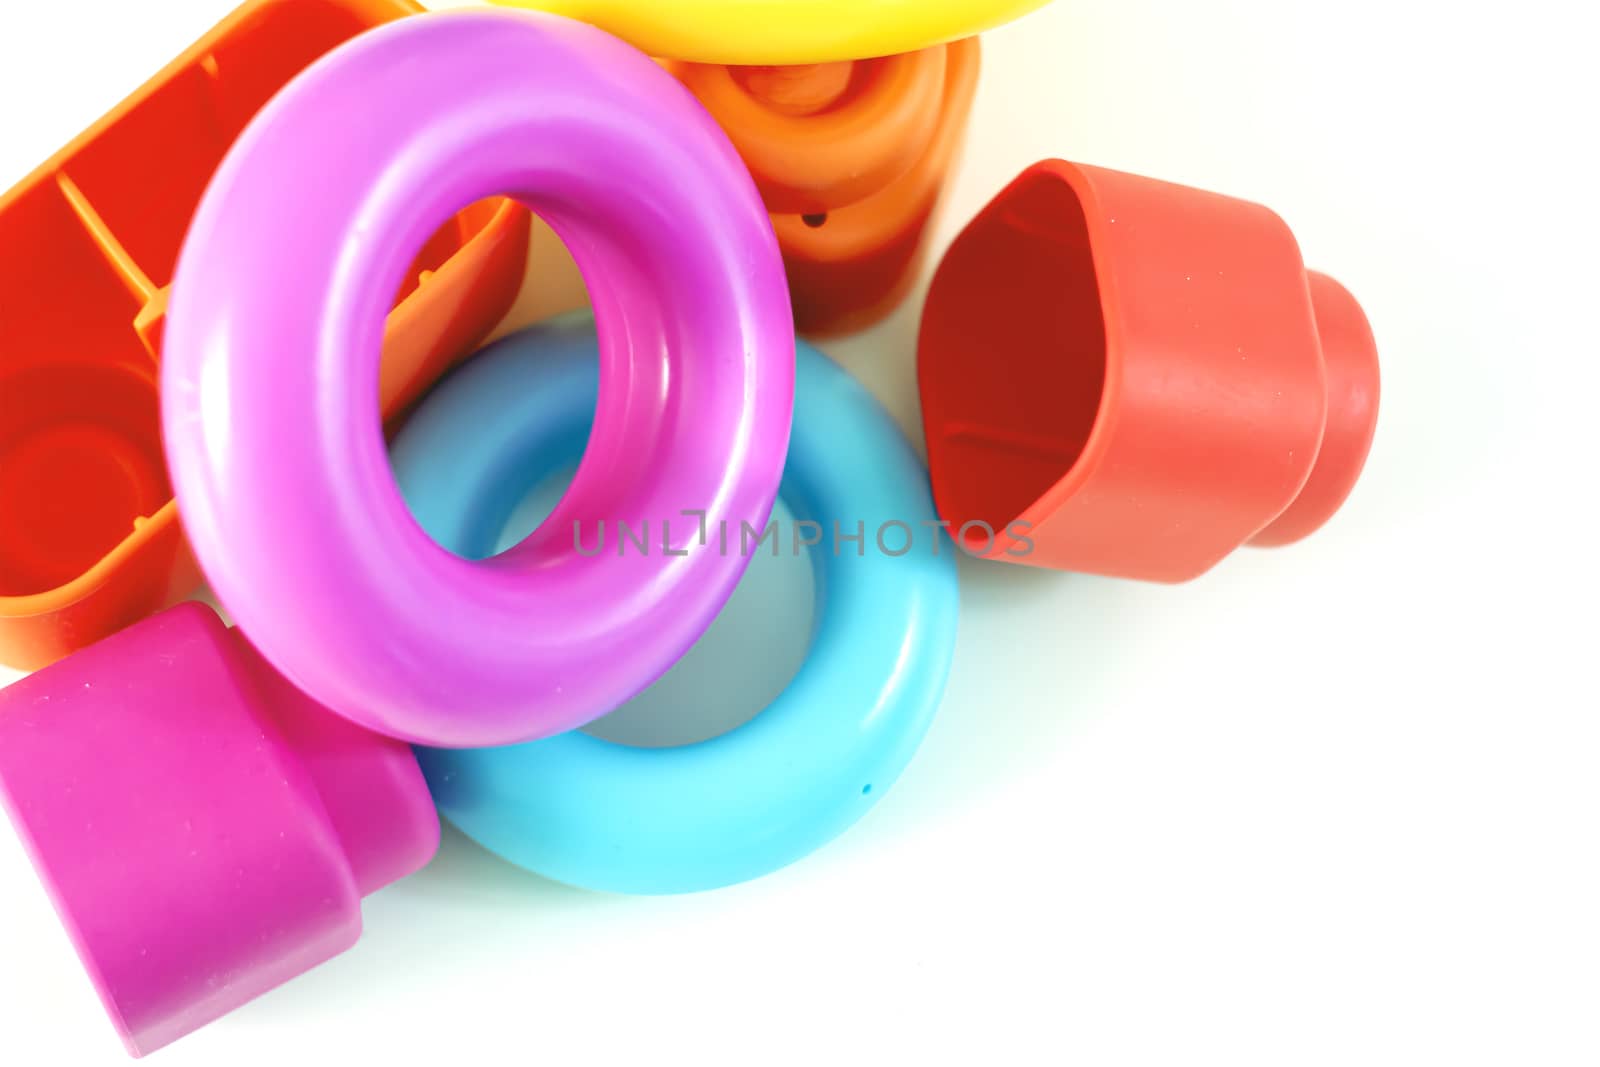 Colored plastic rings and rubber bricks for children to play. Children's toys. Growth and learning